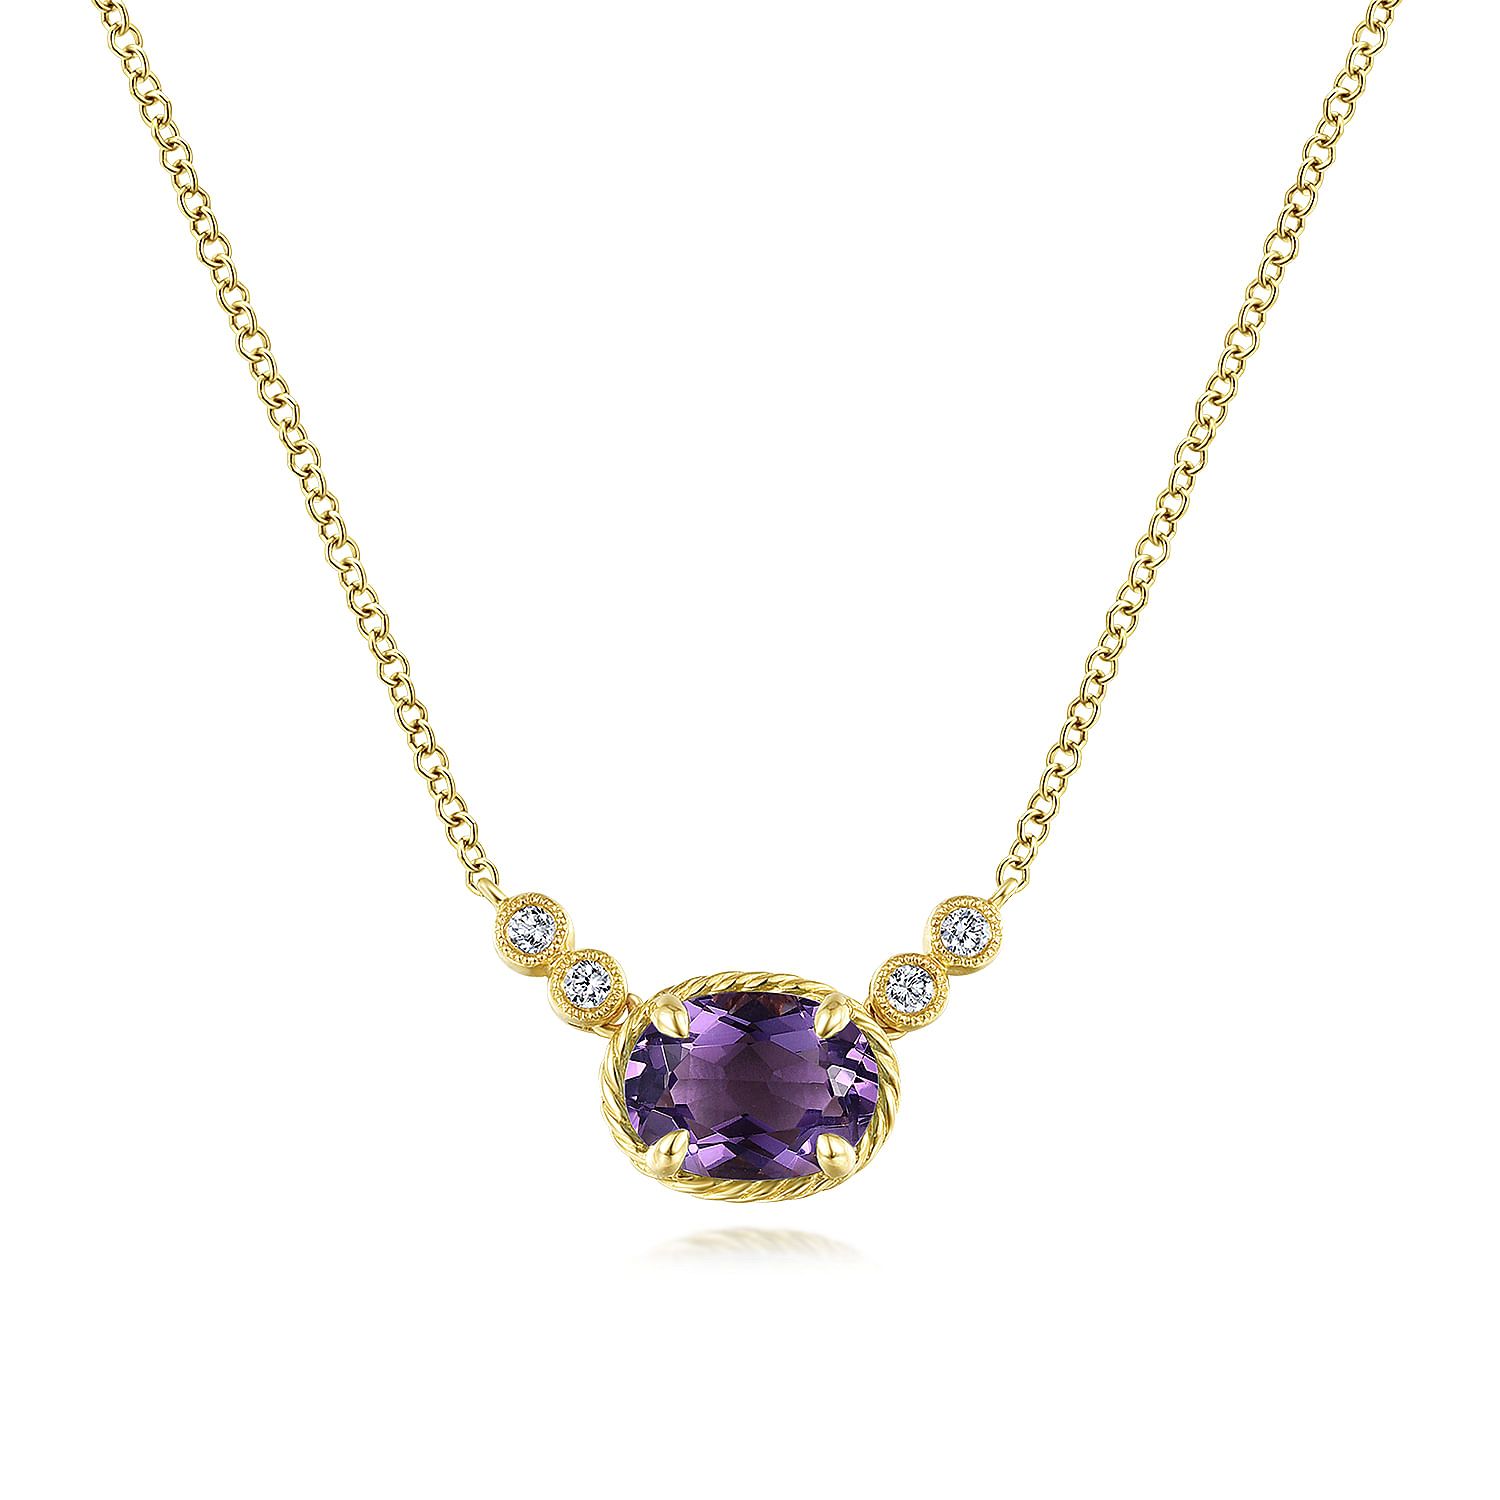 Gabriel - 14K Yellow Gold Oval Amethyst Pendant Necklace with Diamond Accents